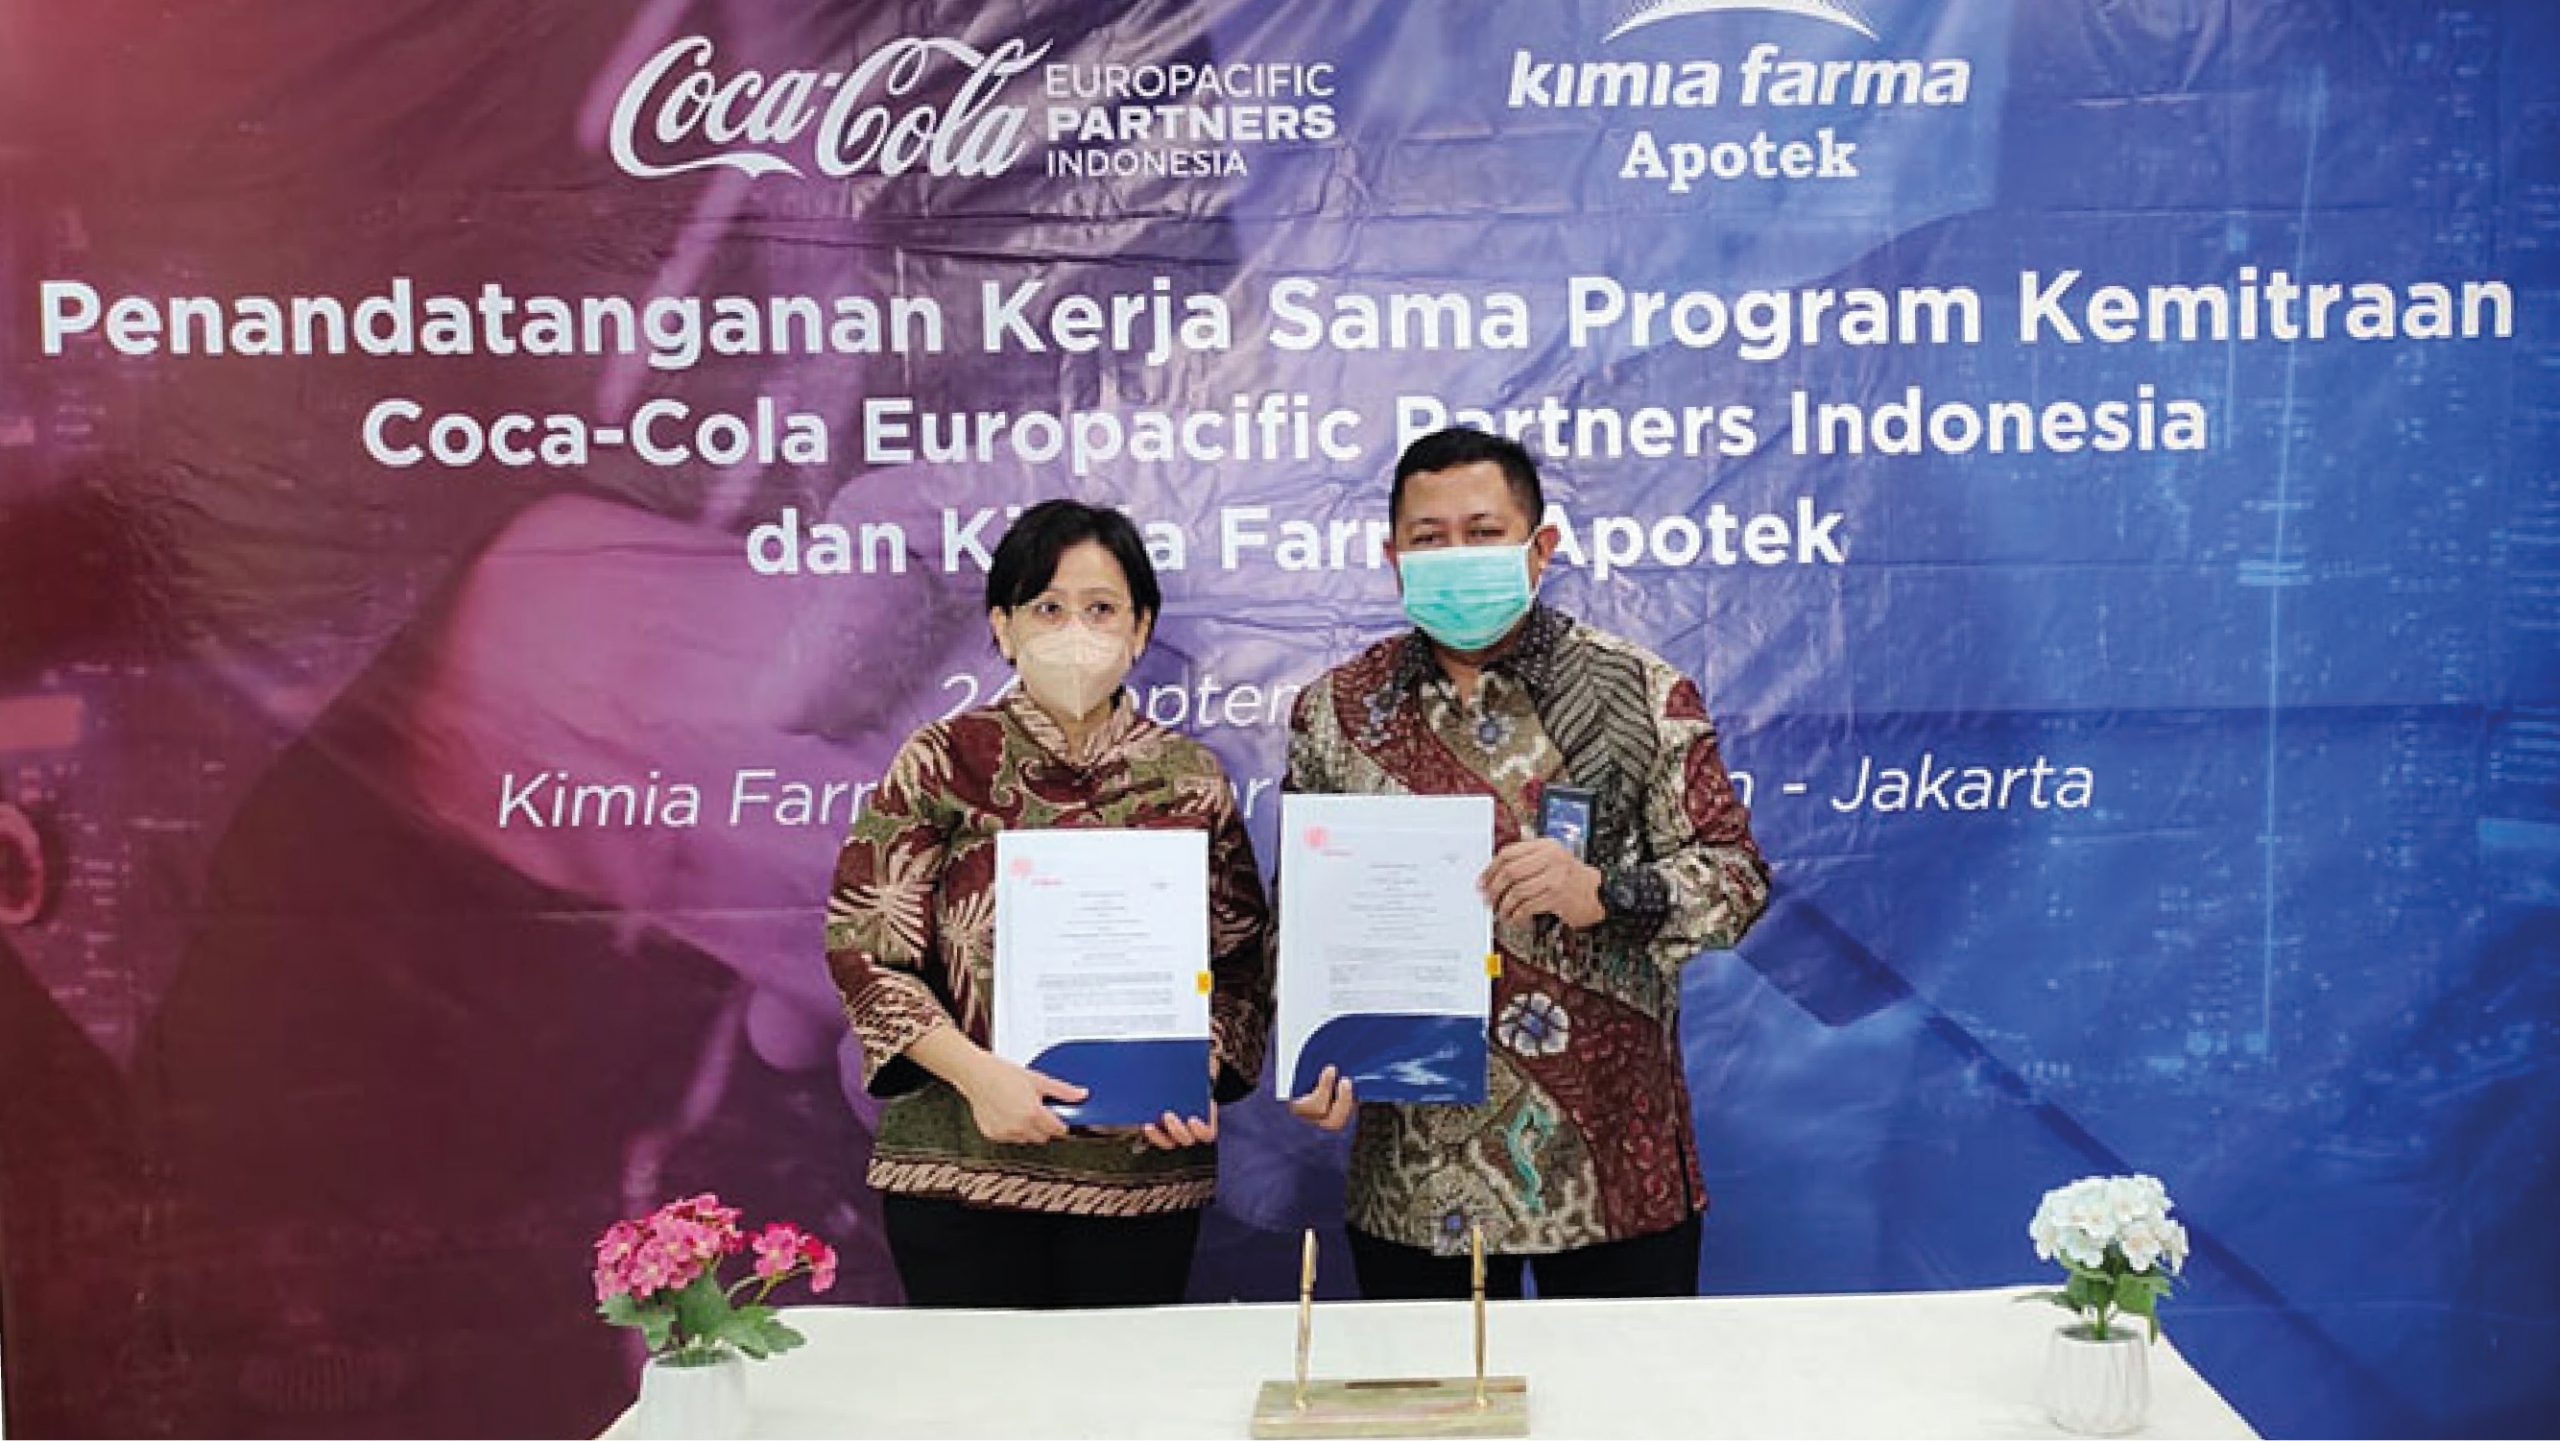 You are currently viewing Kimia Farma Apotek and Coca-Cola Europacific Partners Indonesia Sign Cooperation Agreement to Improve Immunity & Health of CCEP Indonesia Employees during the pandemic